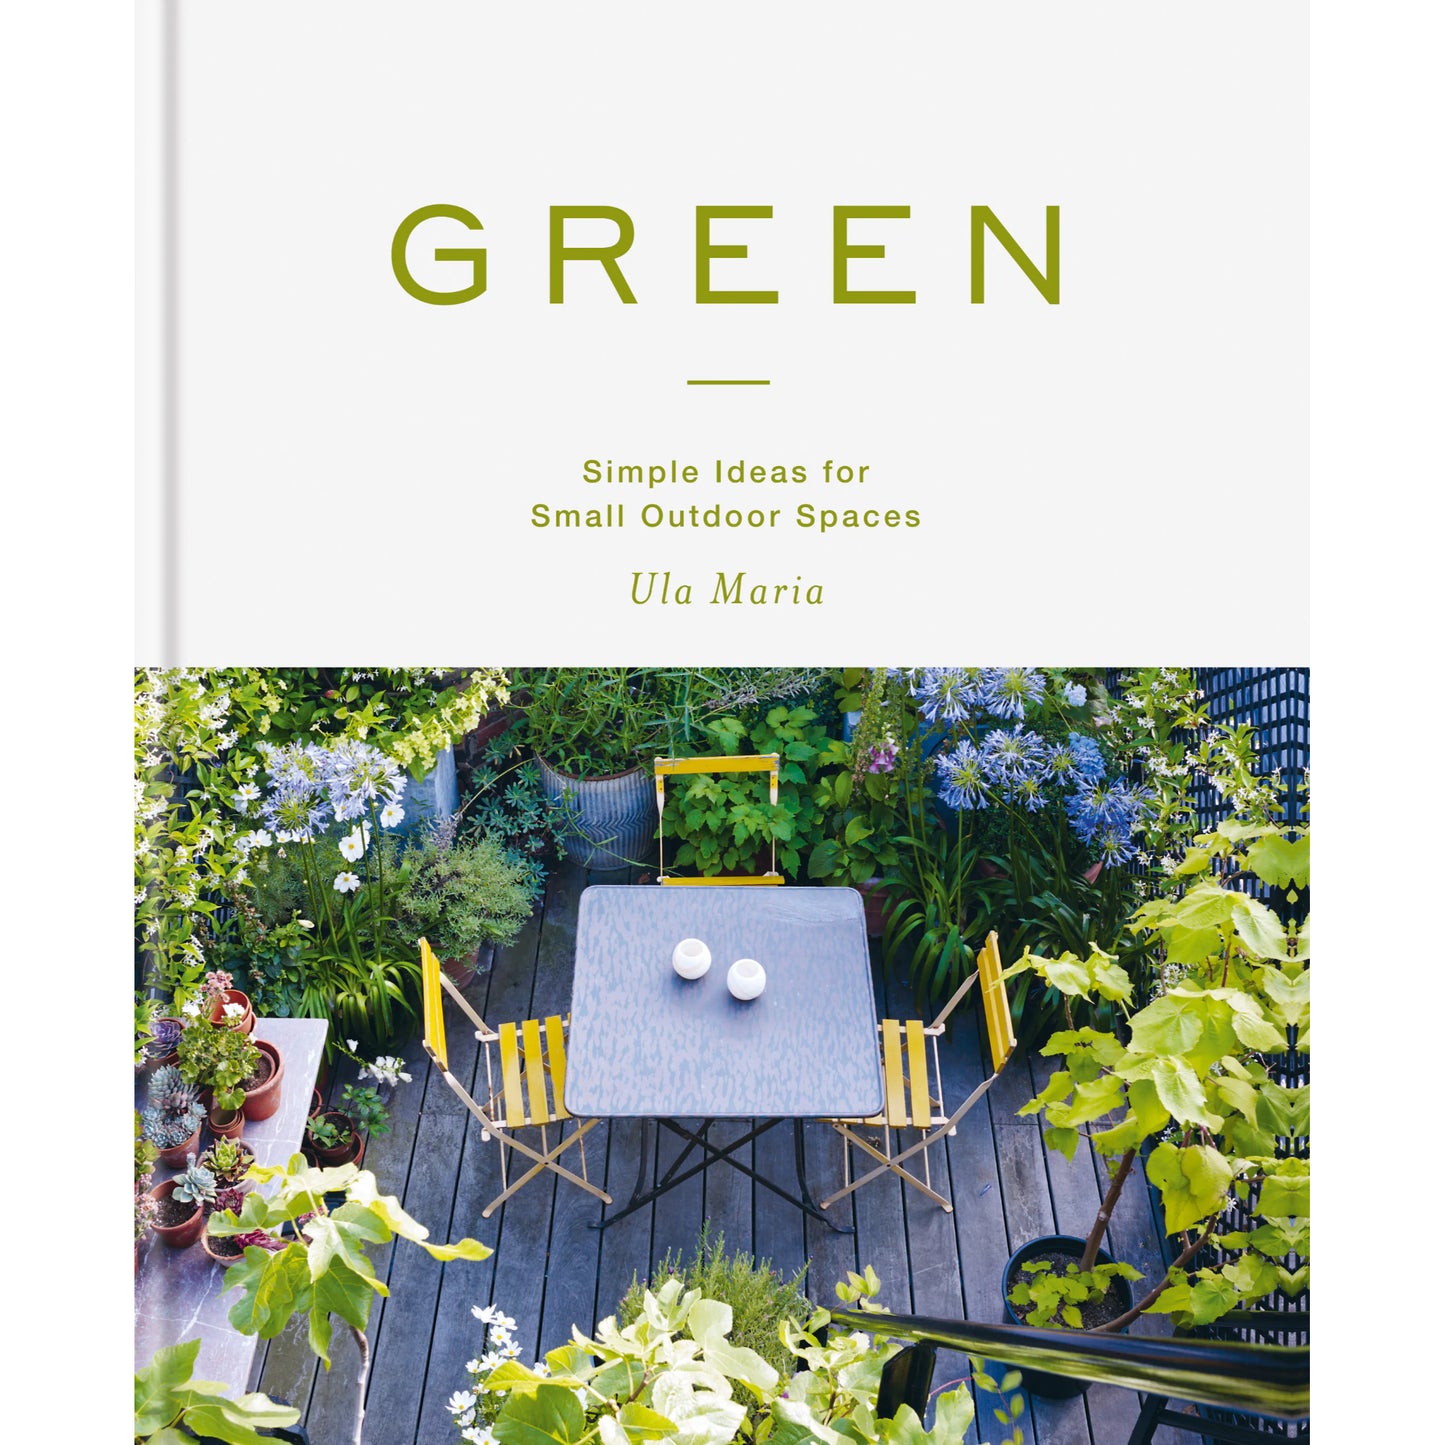 Green: Simple Ideas for Small Outdoor Spaces